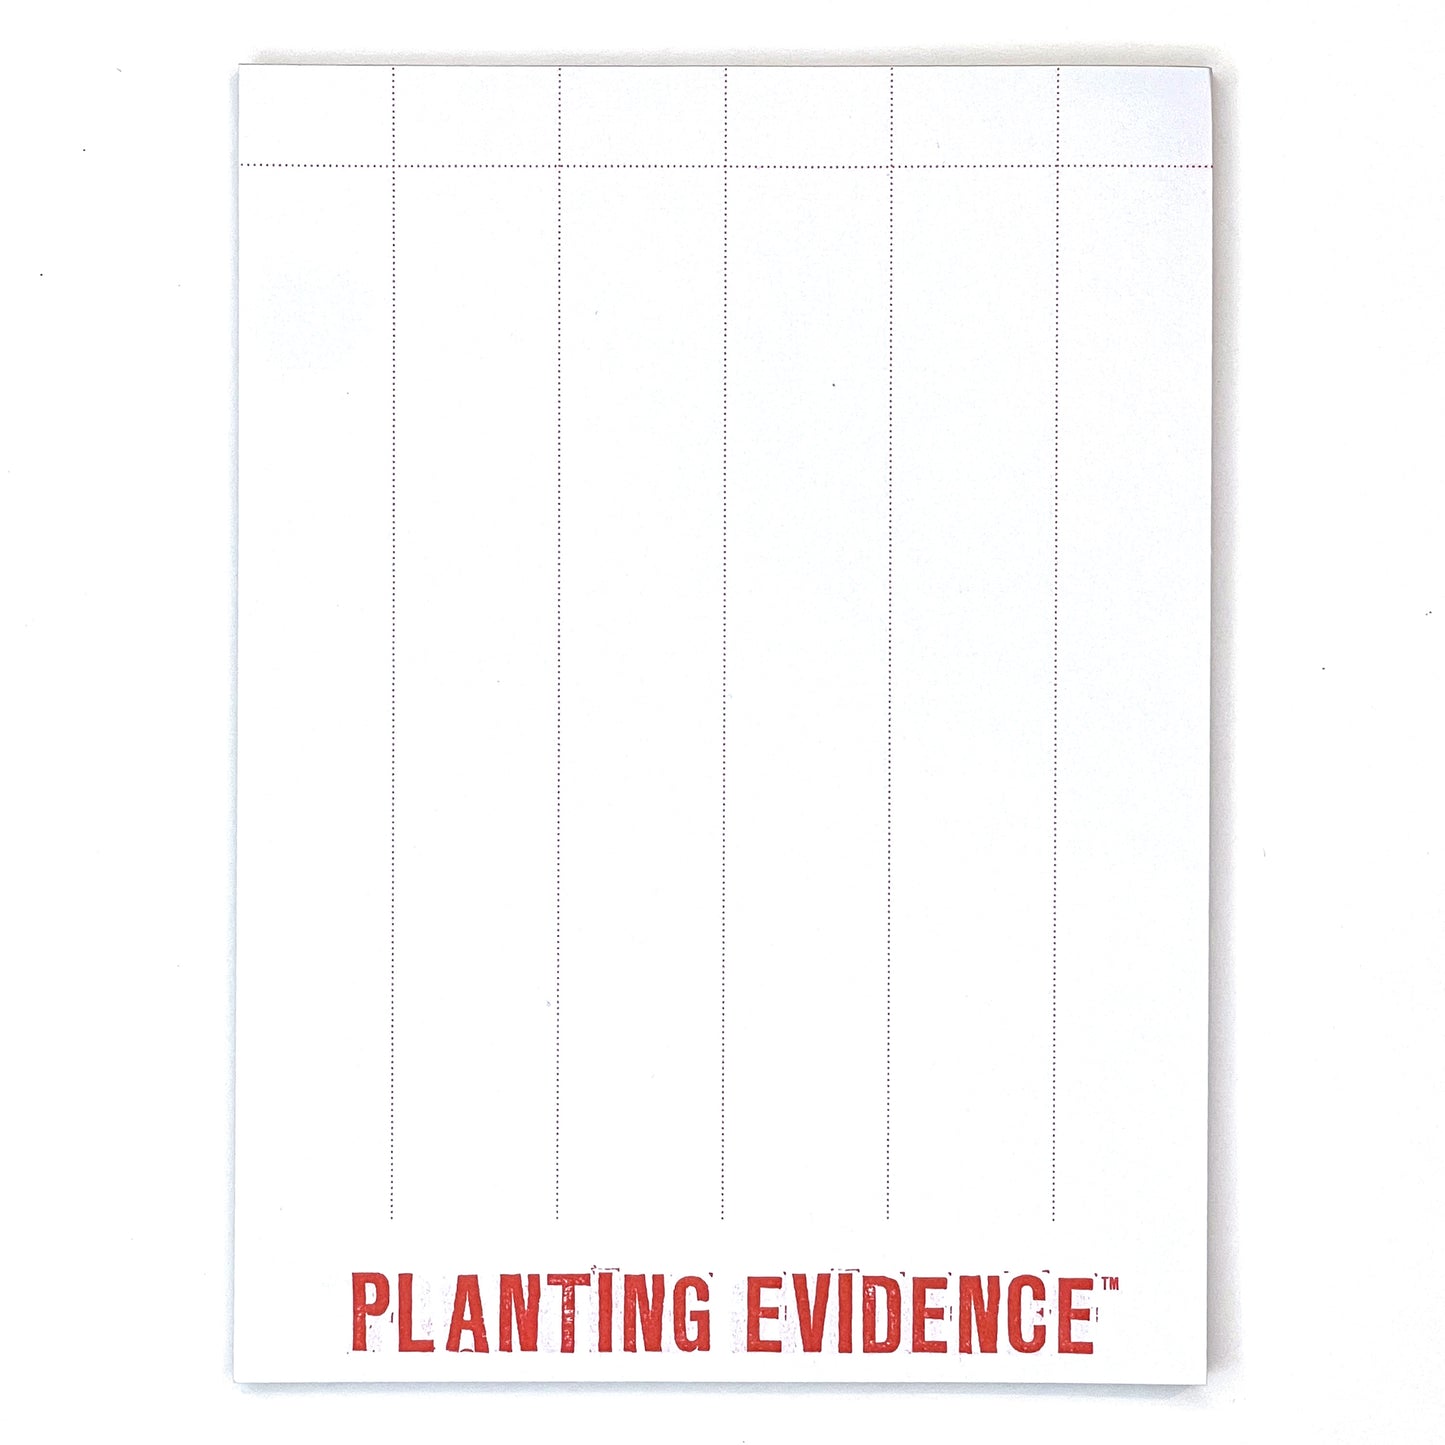 Planting Evidence: The Card Game